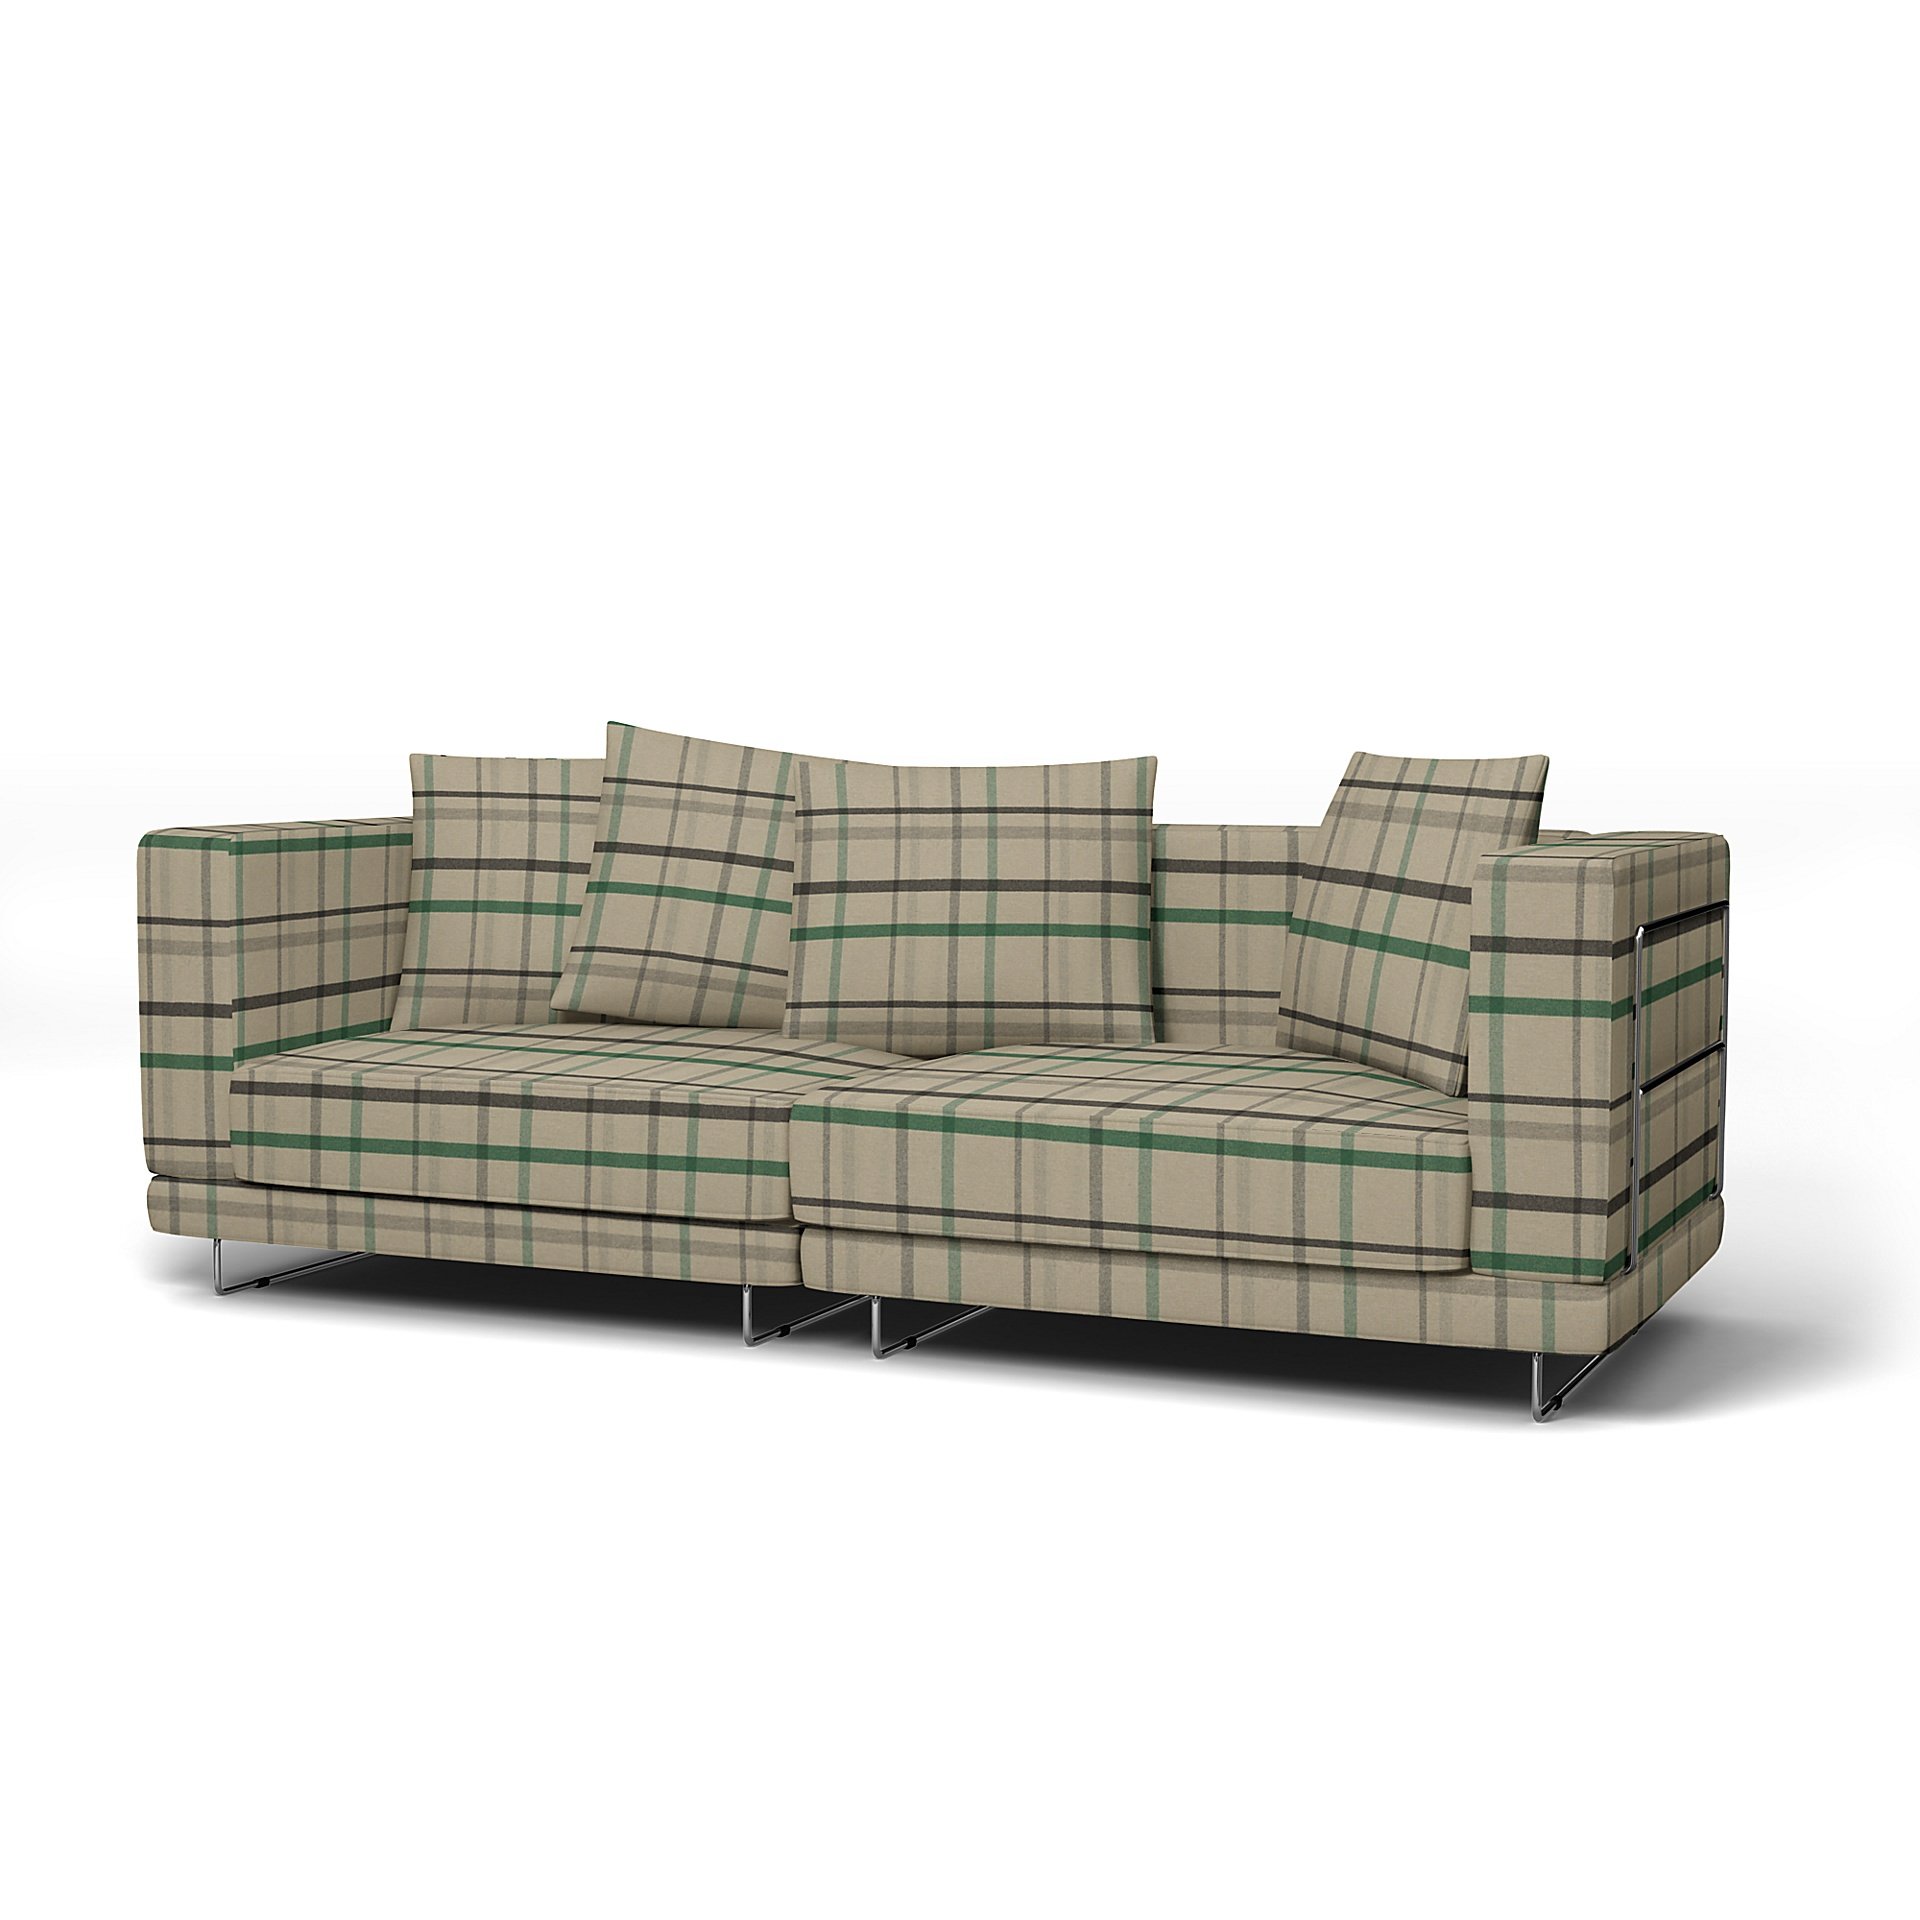 IKEA - Tylosand 3 Seater Sofa Cover, Forest Glade, Wool - Bemz